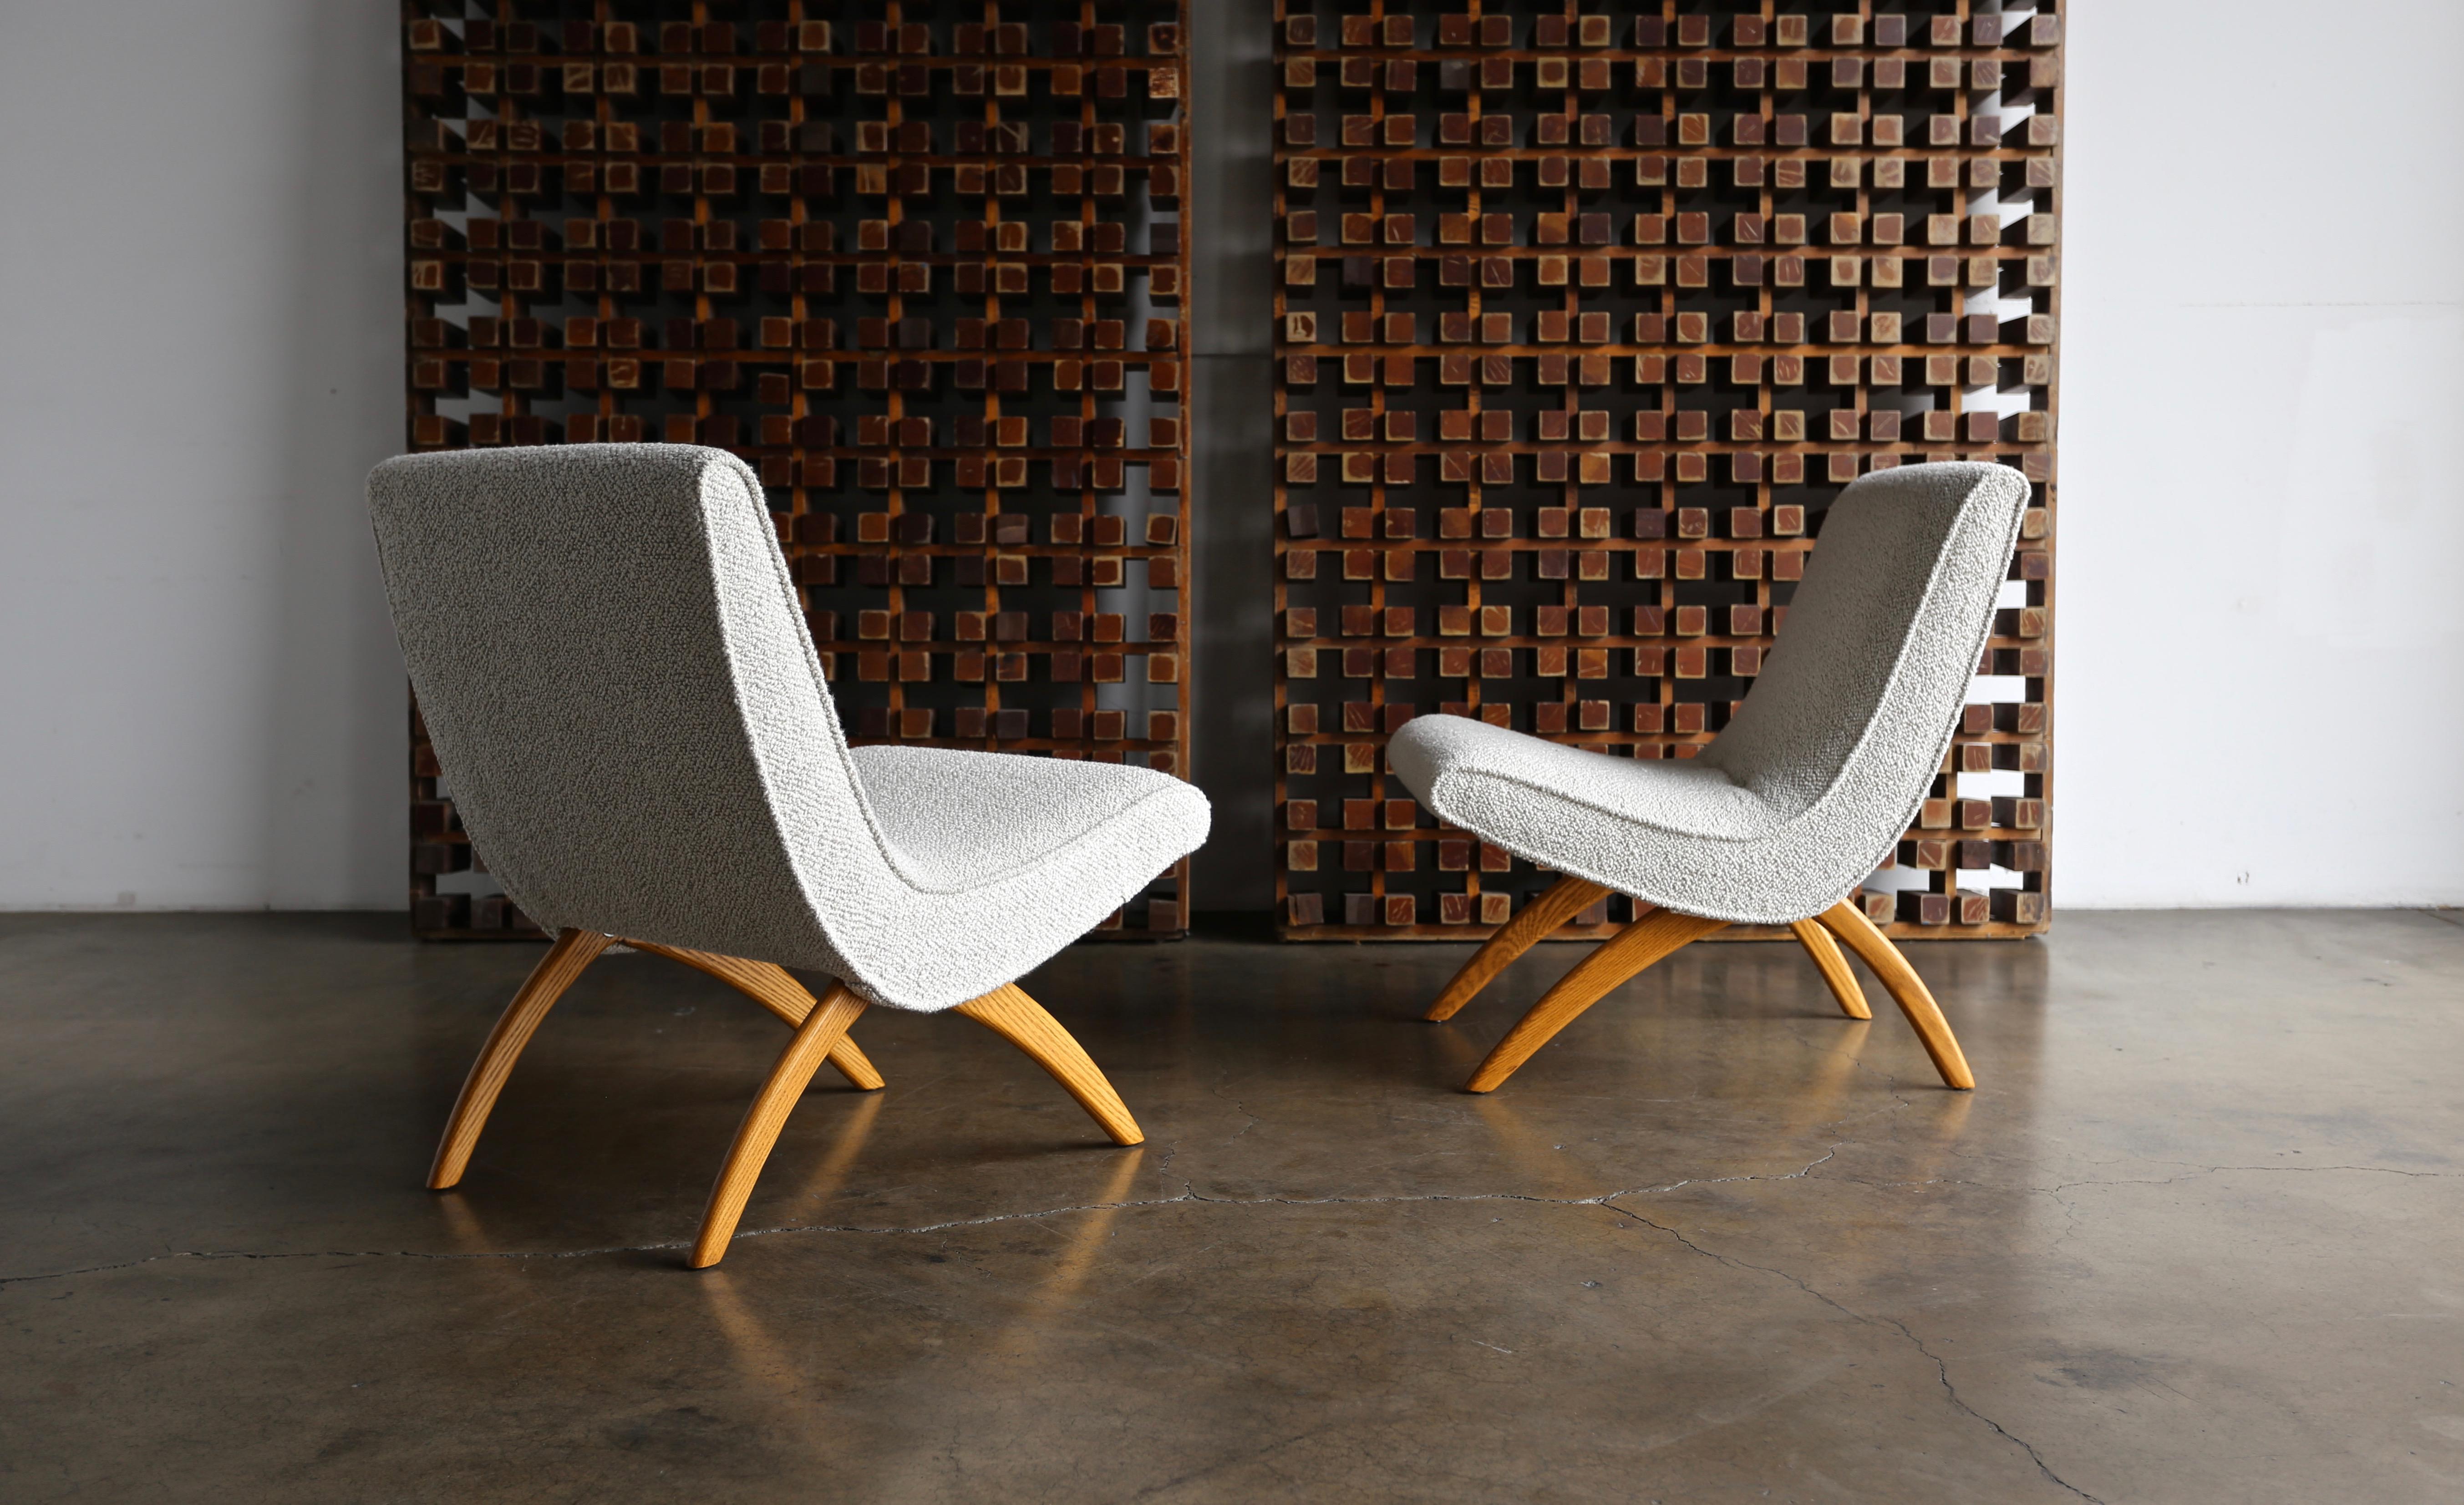 Milo Baughman Scoop Chairs for Thayer Coggin circa 1955. This pair has been expertly restored.